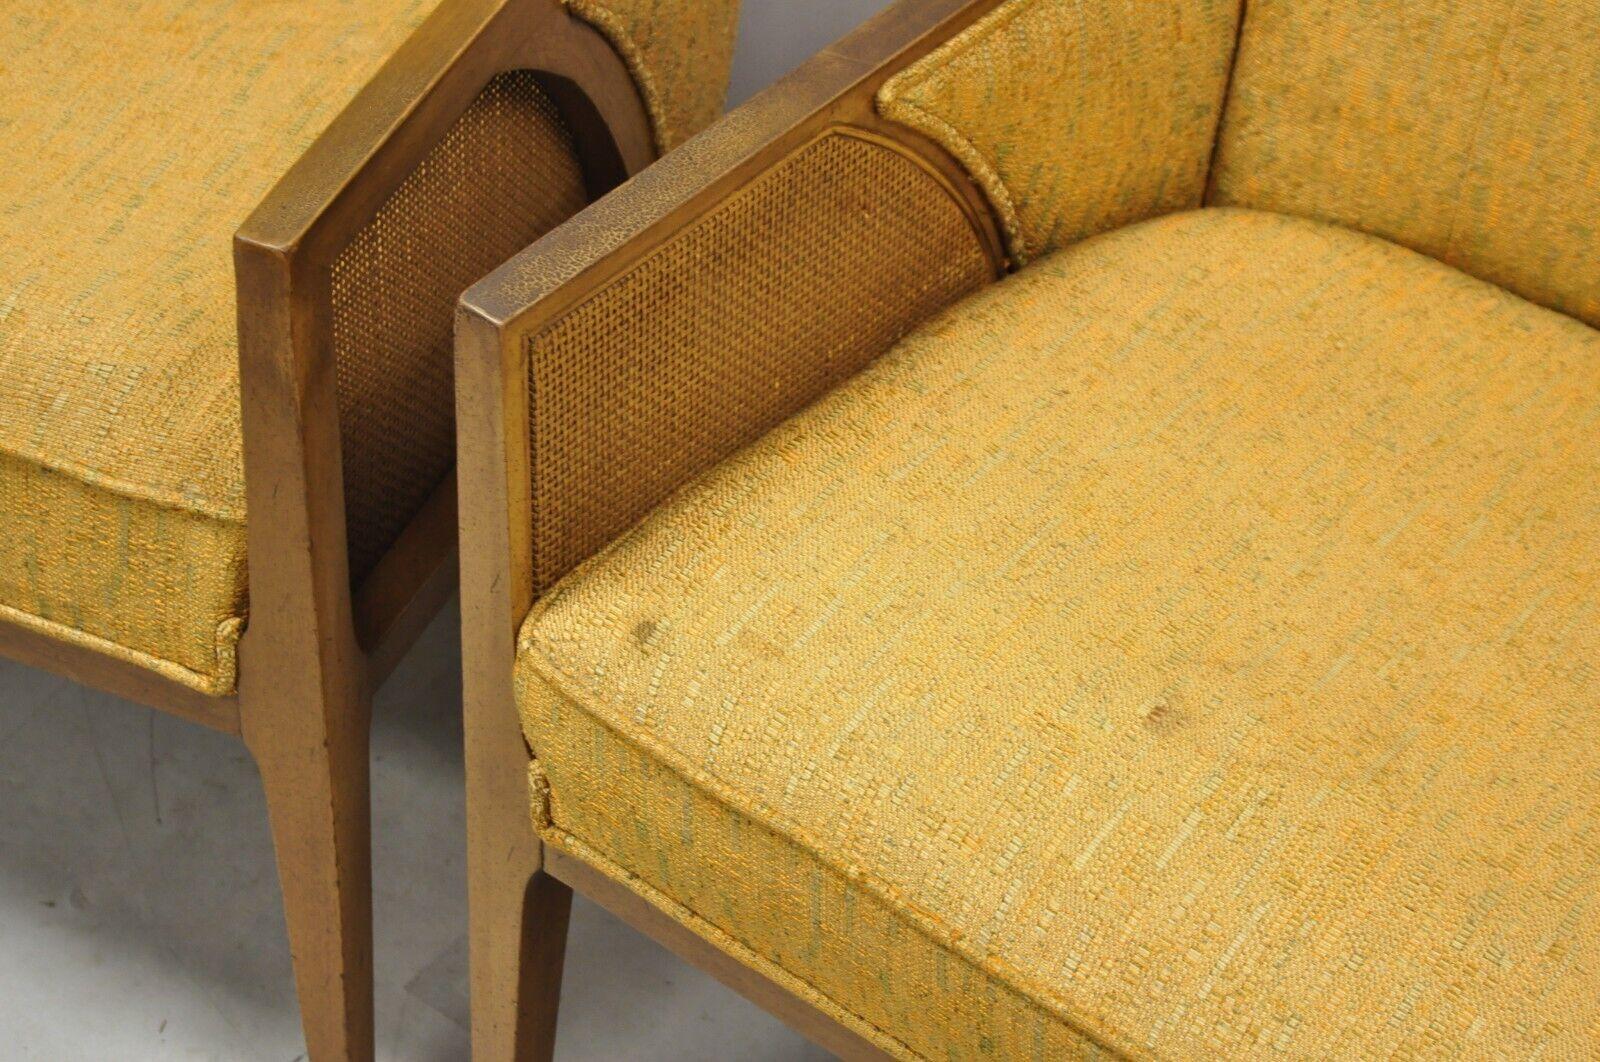 Mid Century Hollywood Regency Sculpted Wood Cane Panel Lounge Chairs - a Pair For Sale 1